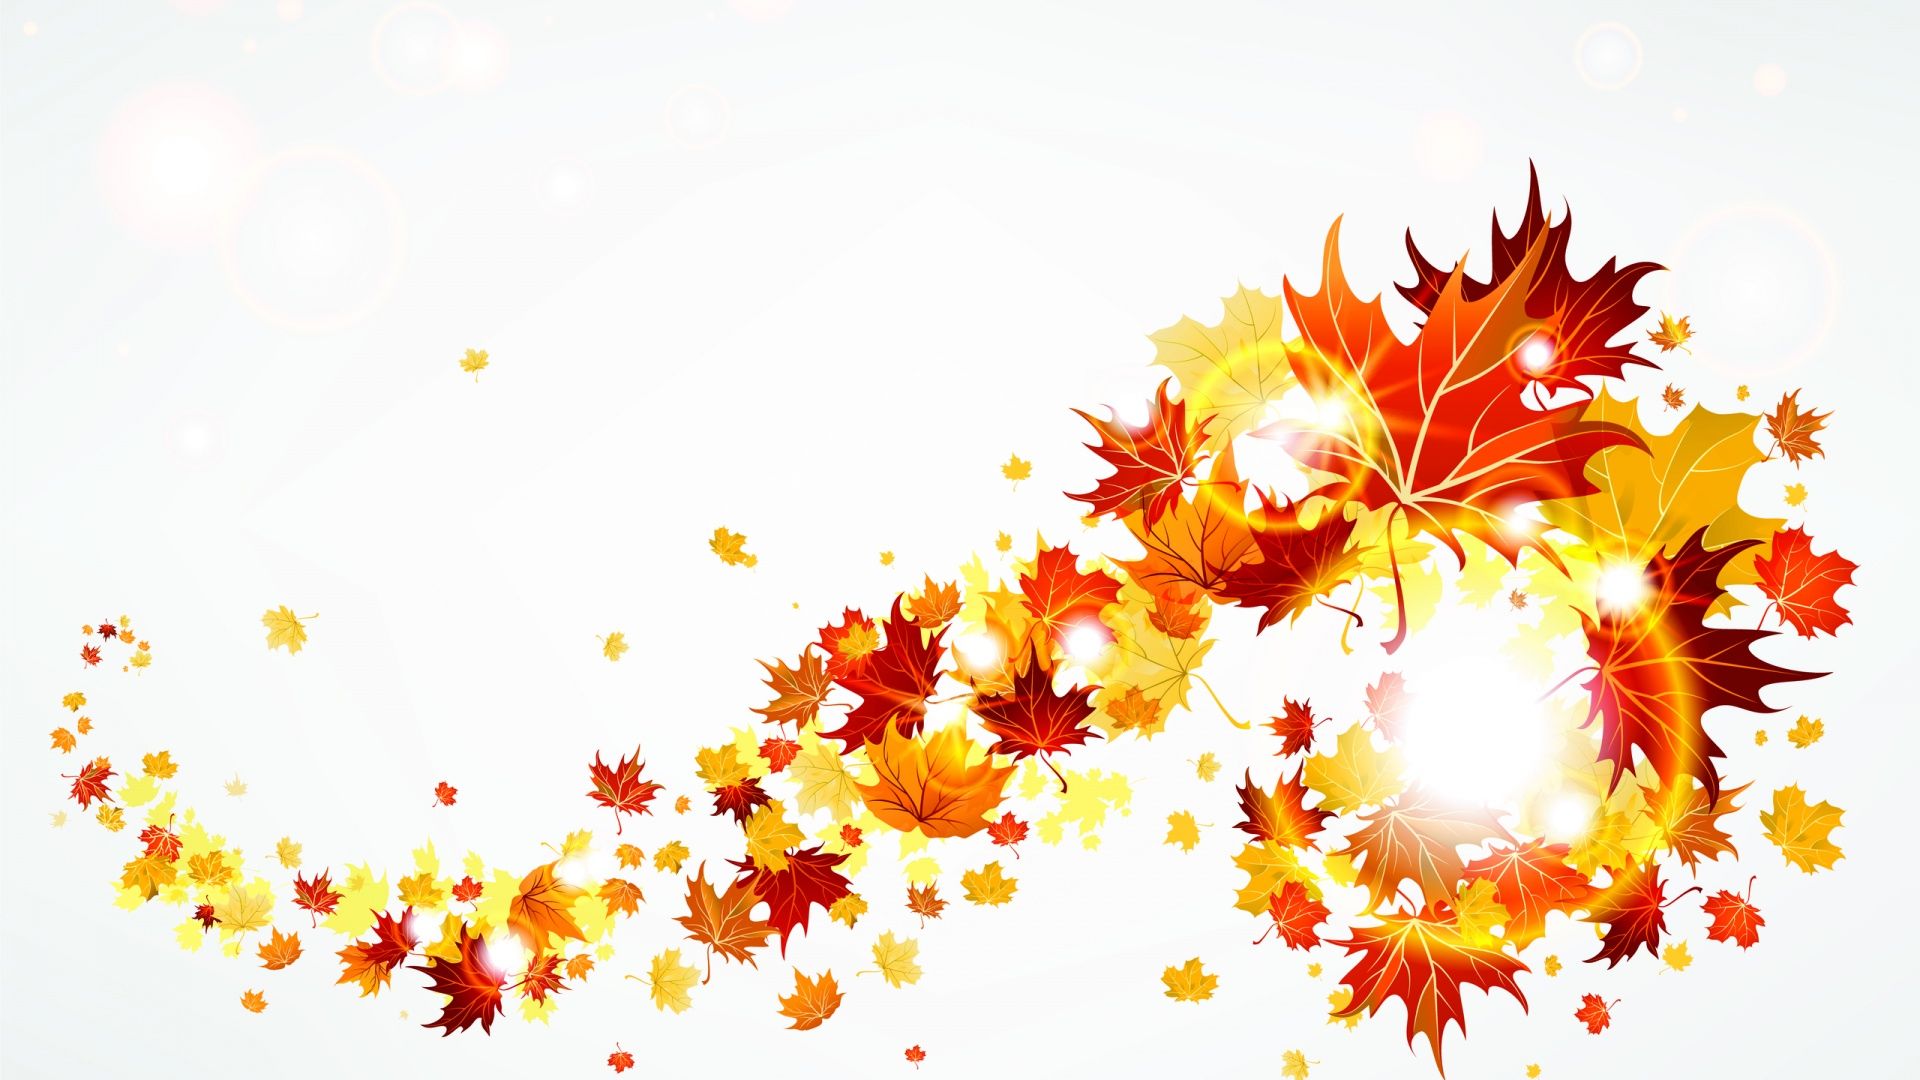 Free fall fall clipart free images 6 